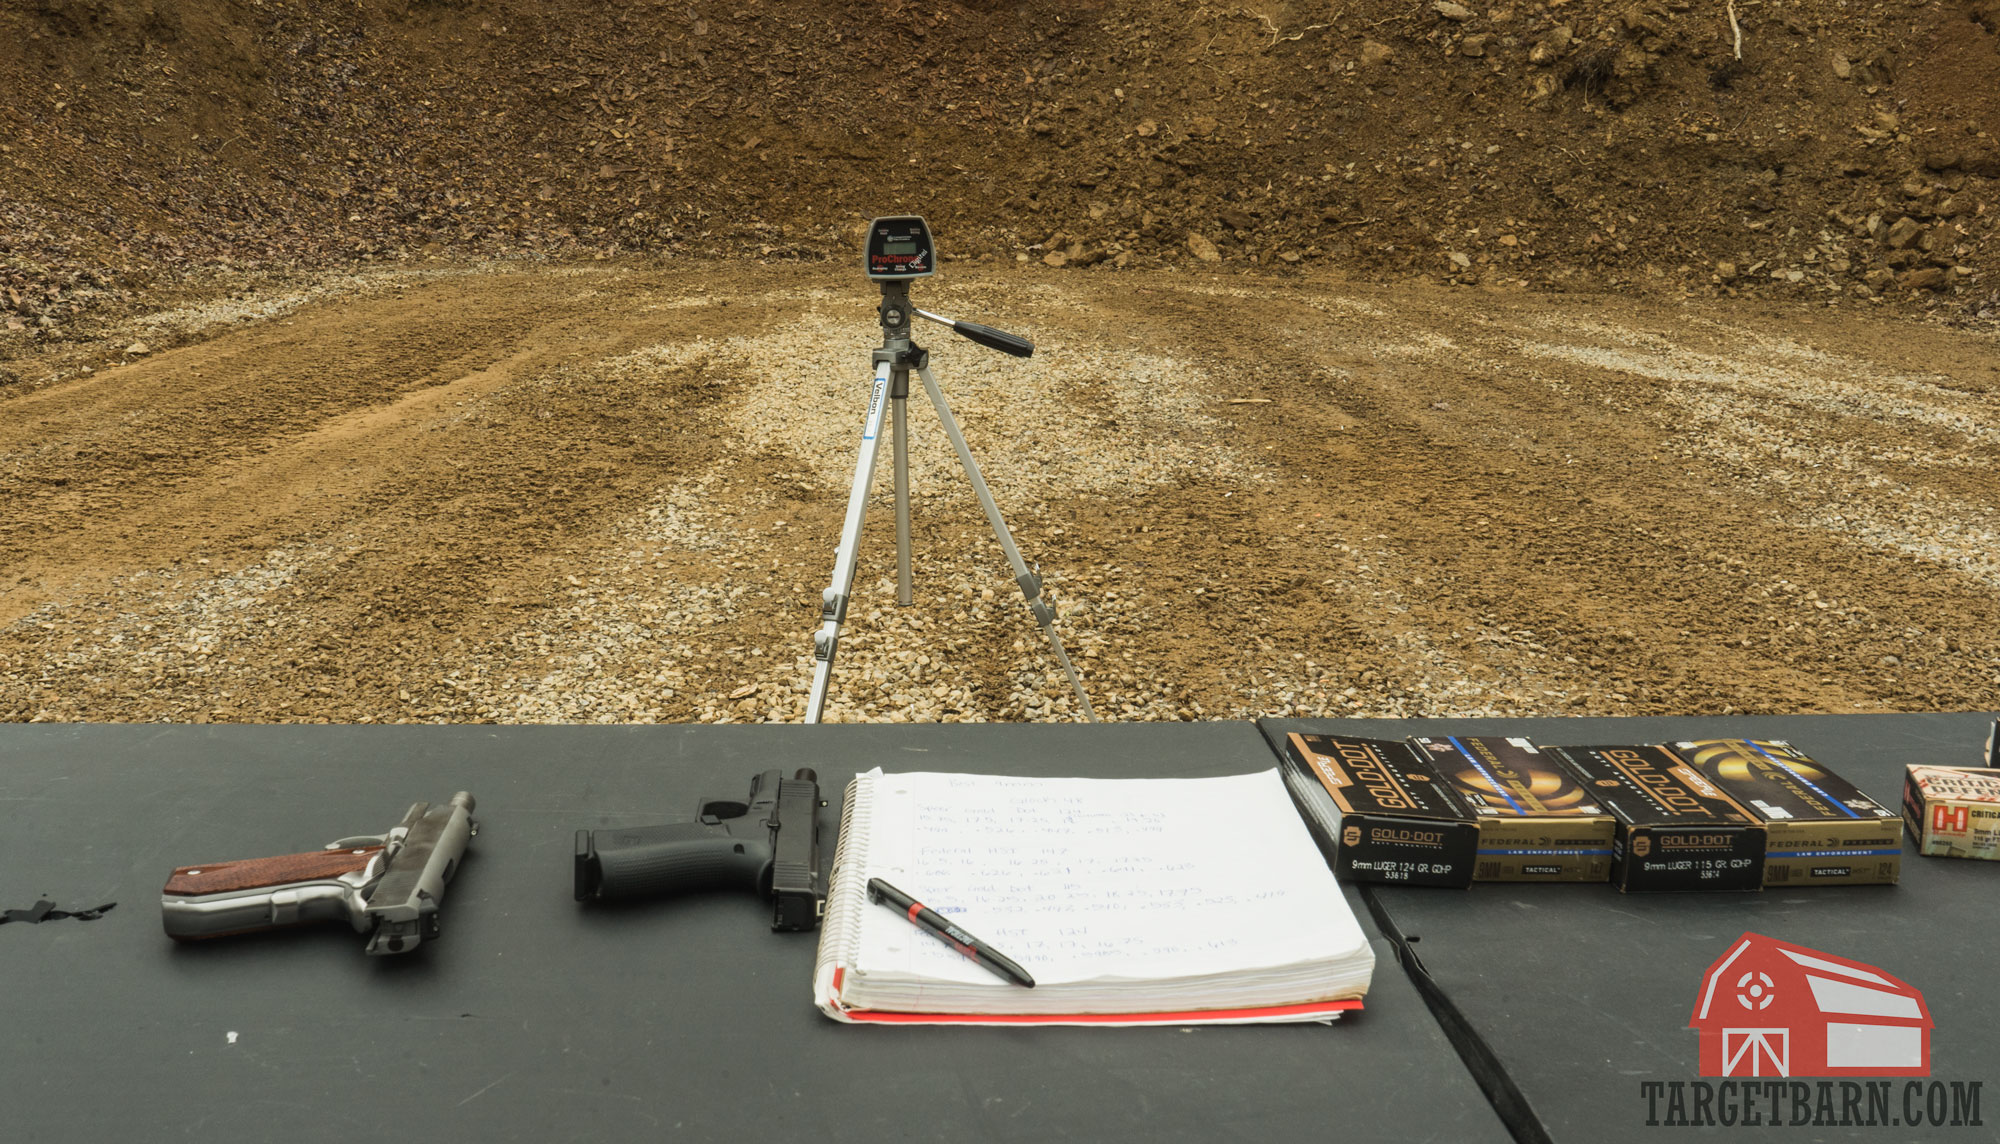 a table set up at the range with pistols, a notebook, and ammo boxes, and a chronograph set up down range to measure velocities